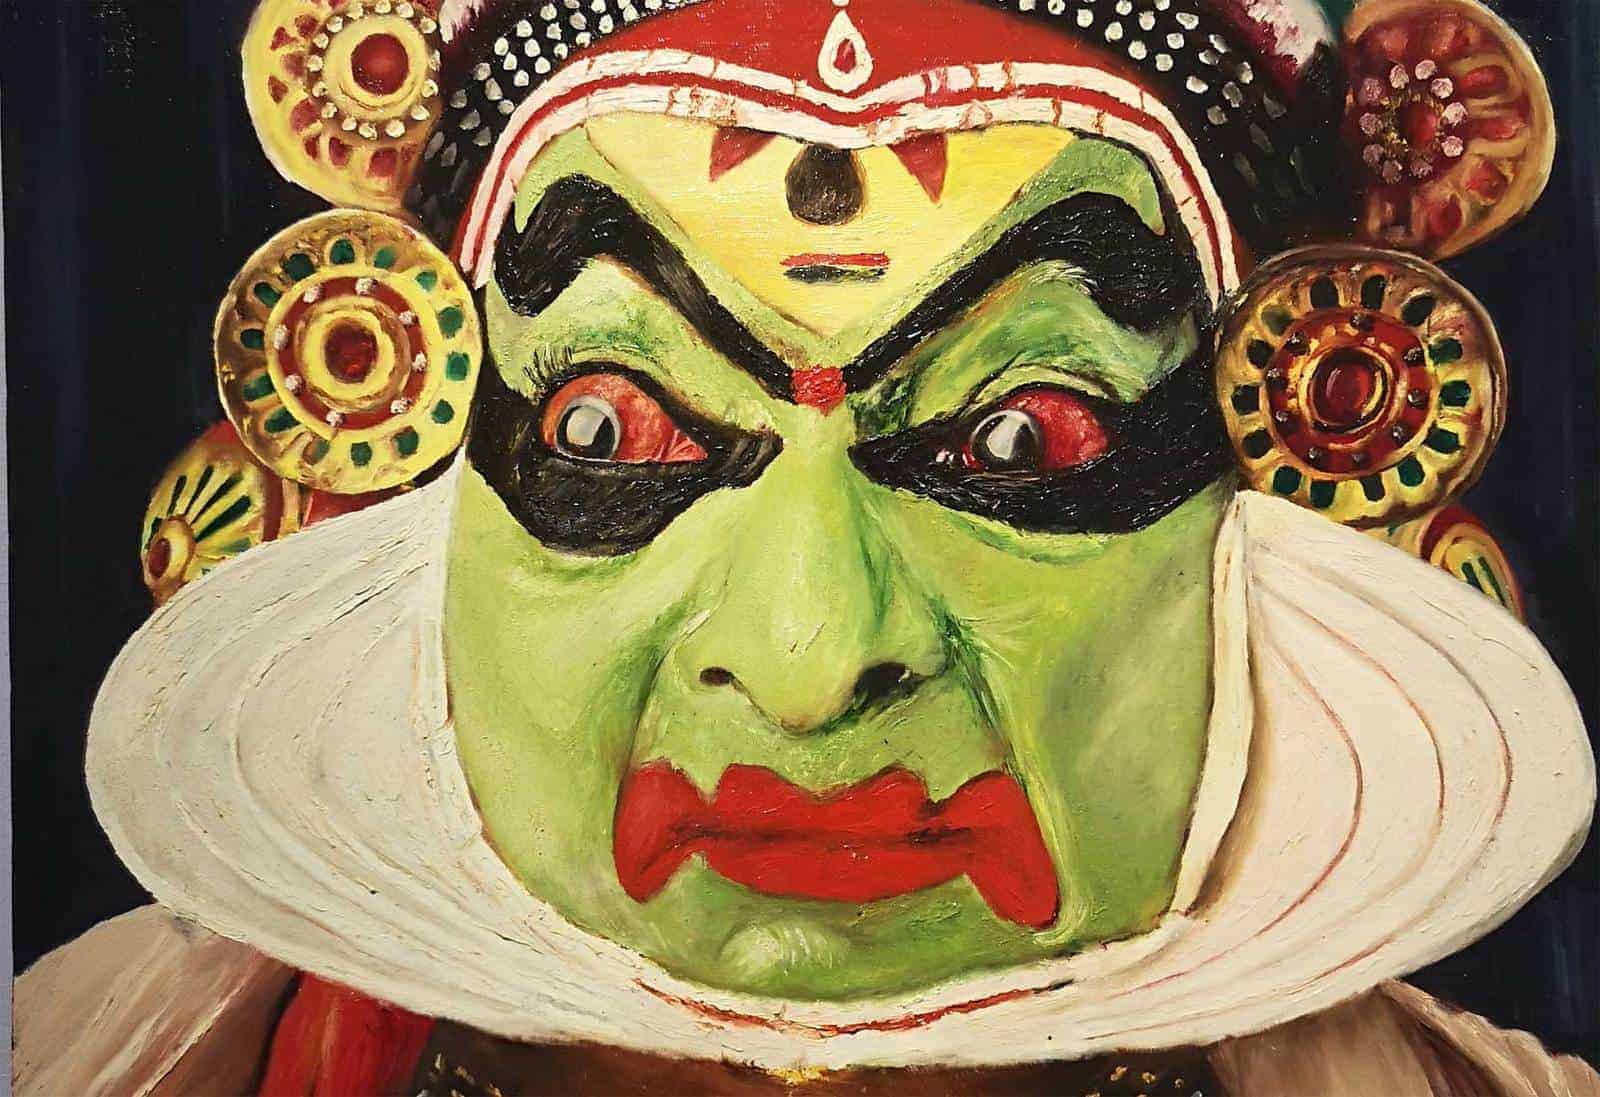 A detail of the painting, "Faces of Life (Fear)" by Subashini K Chandra, on view at "Yes, I speak Indian...". Image courtesy of Coda Culture. 